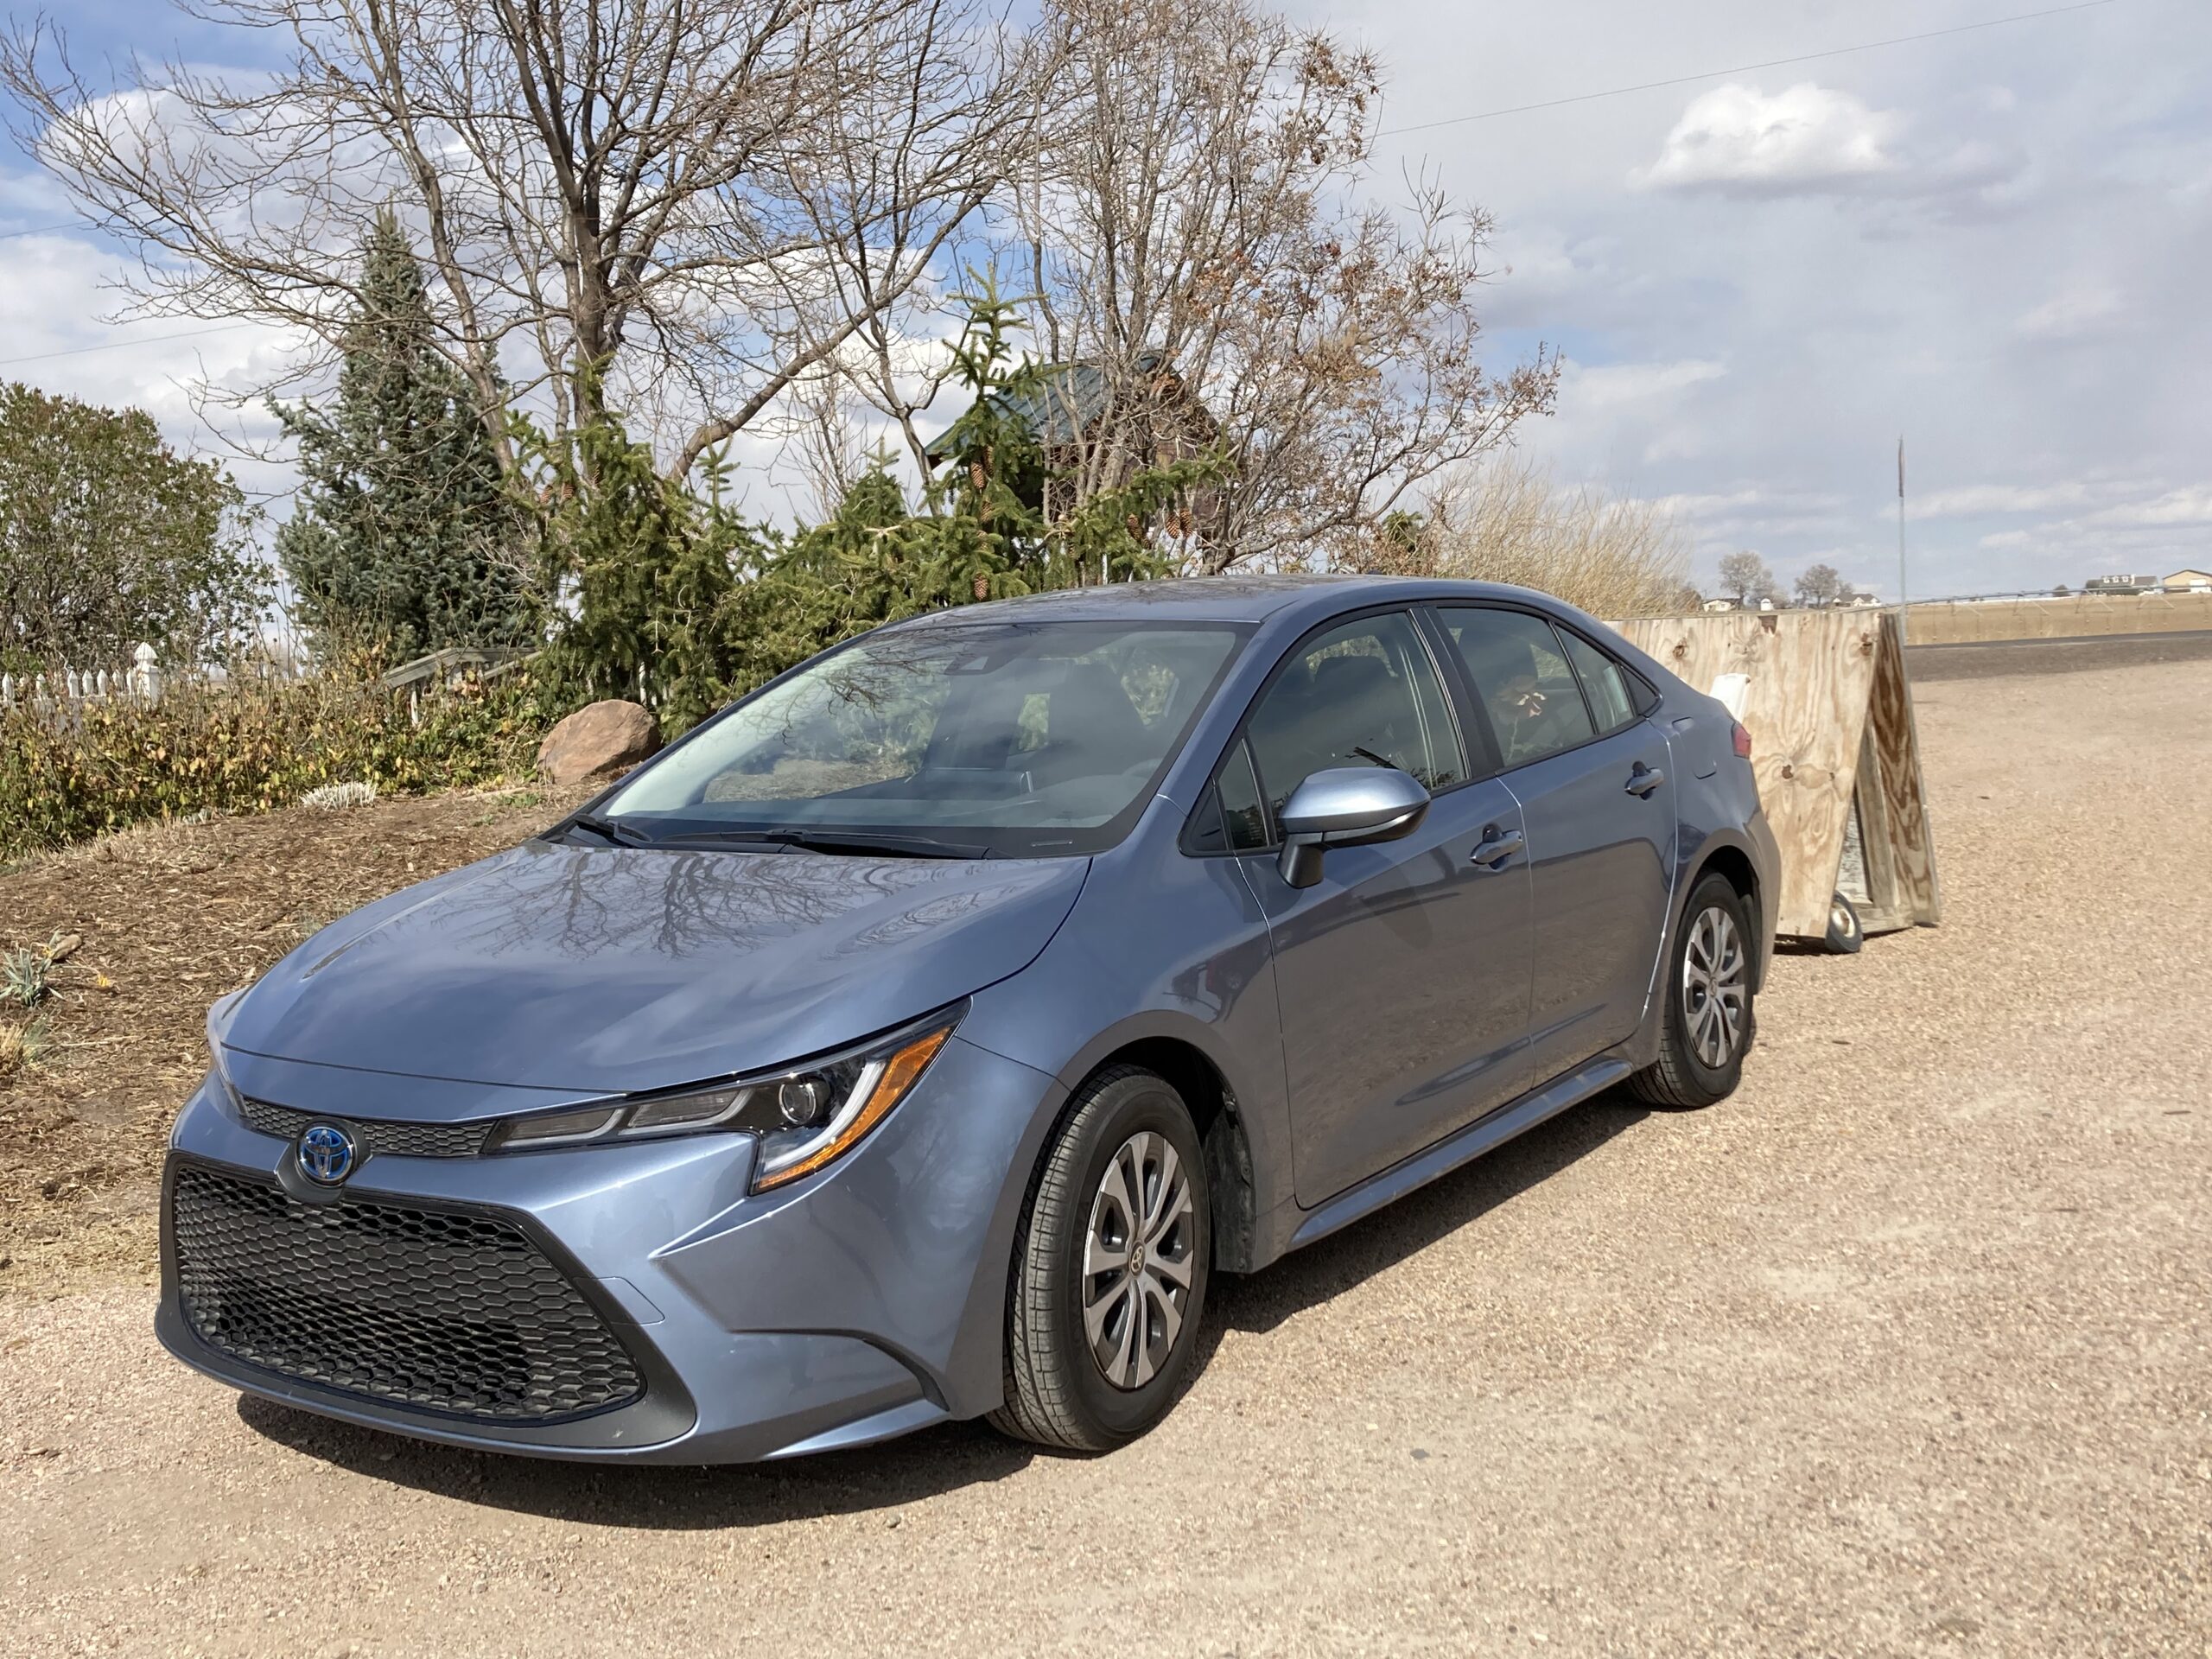 Corolla adds style to hybrid mpg for Toyota Bud Wells